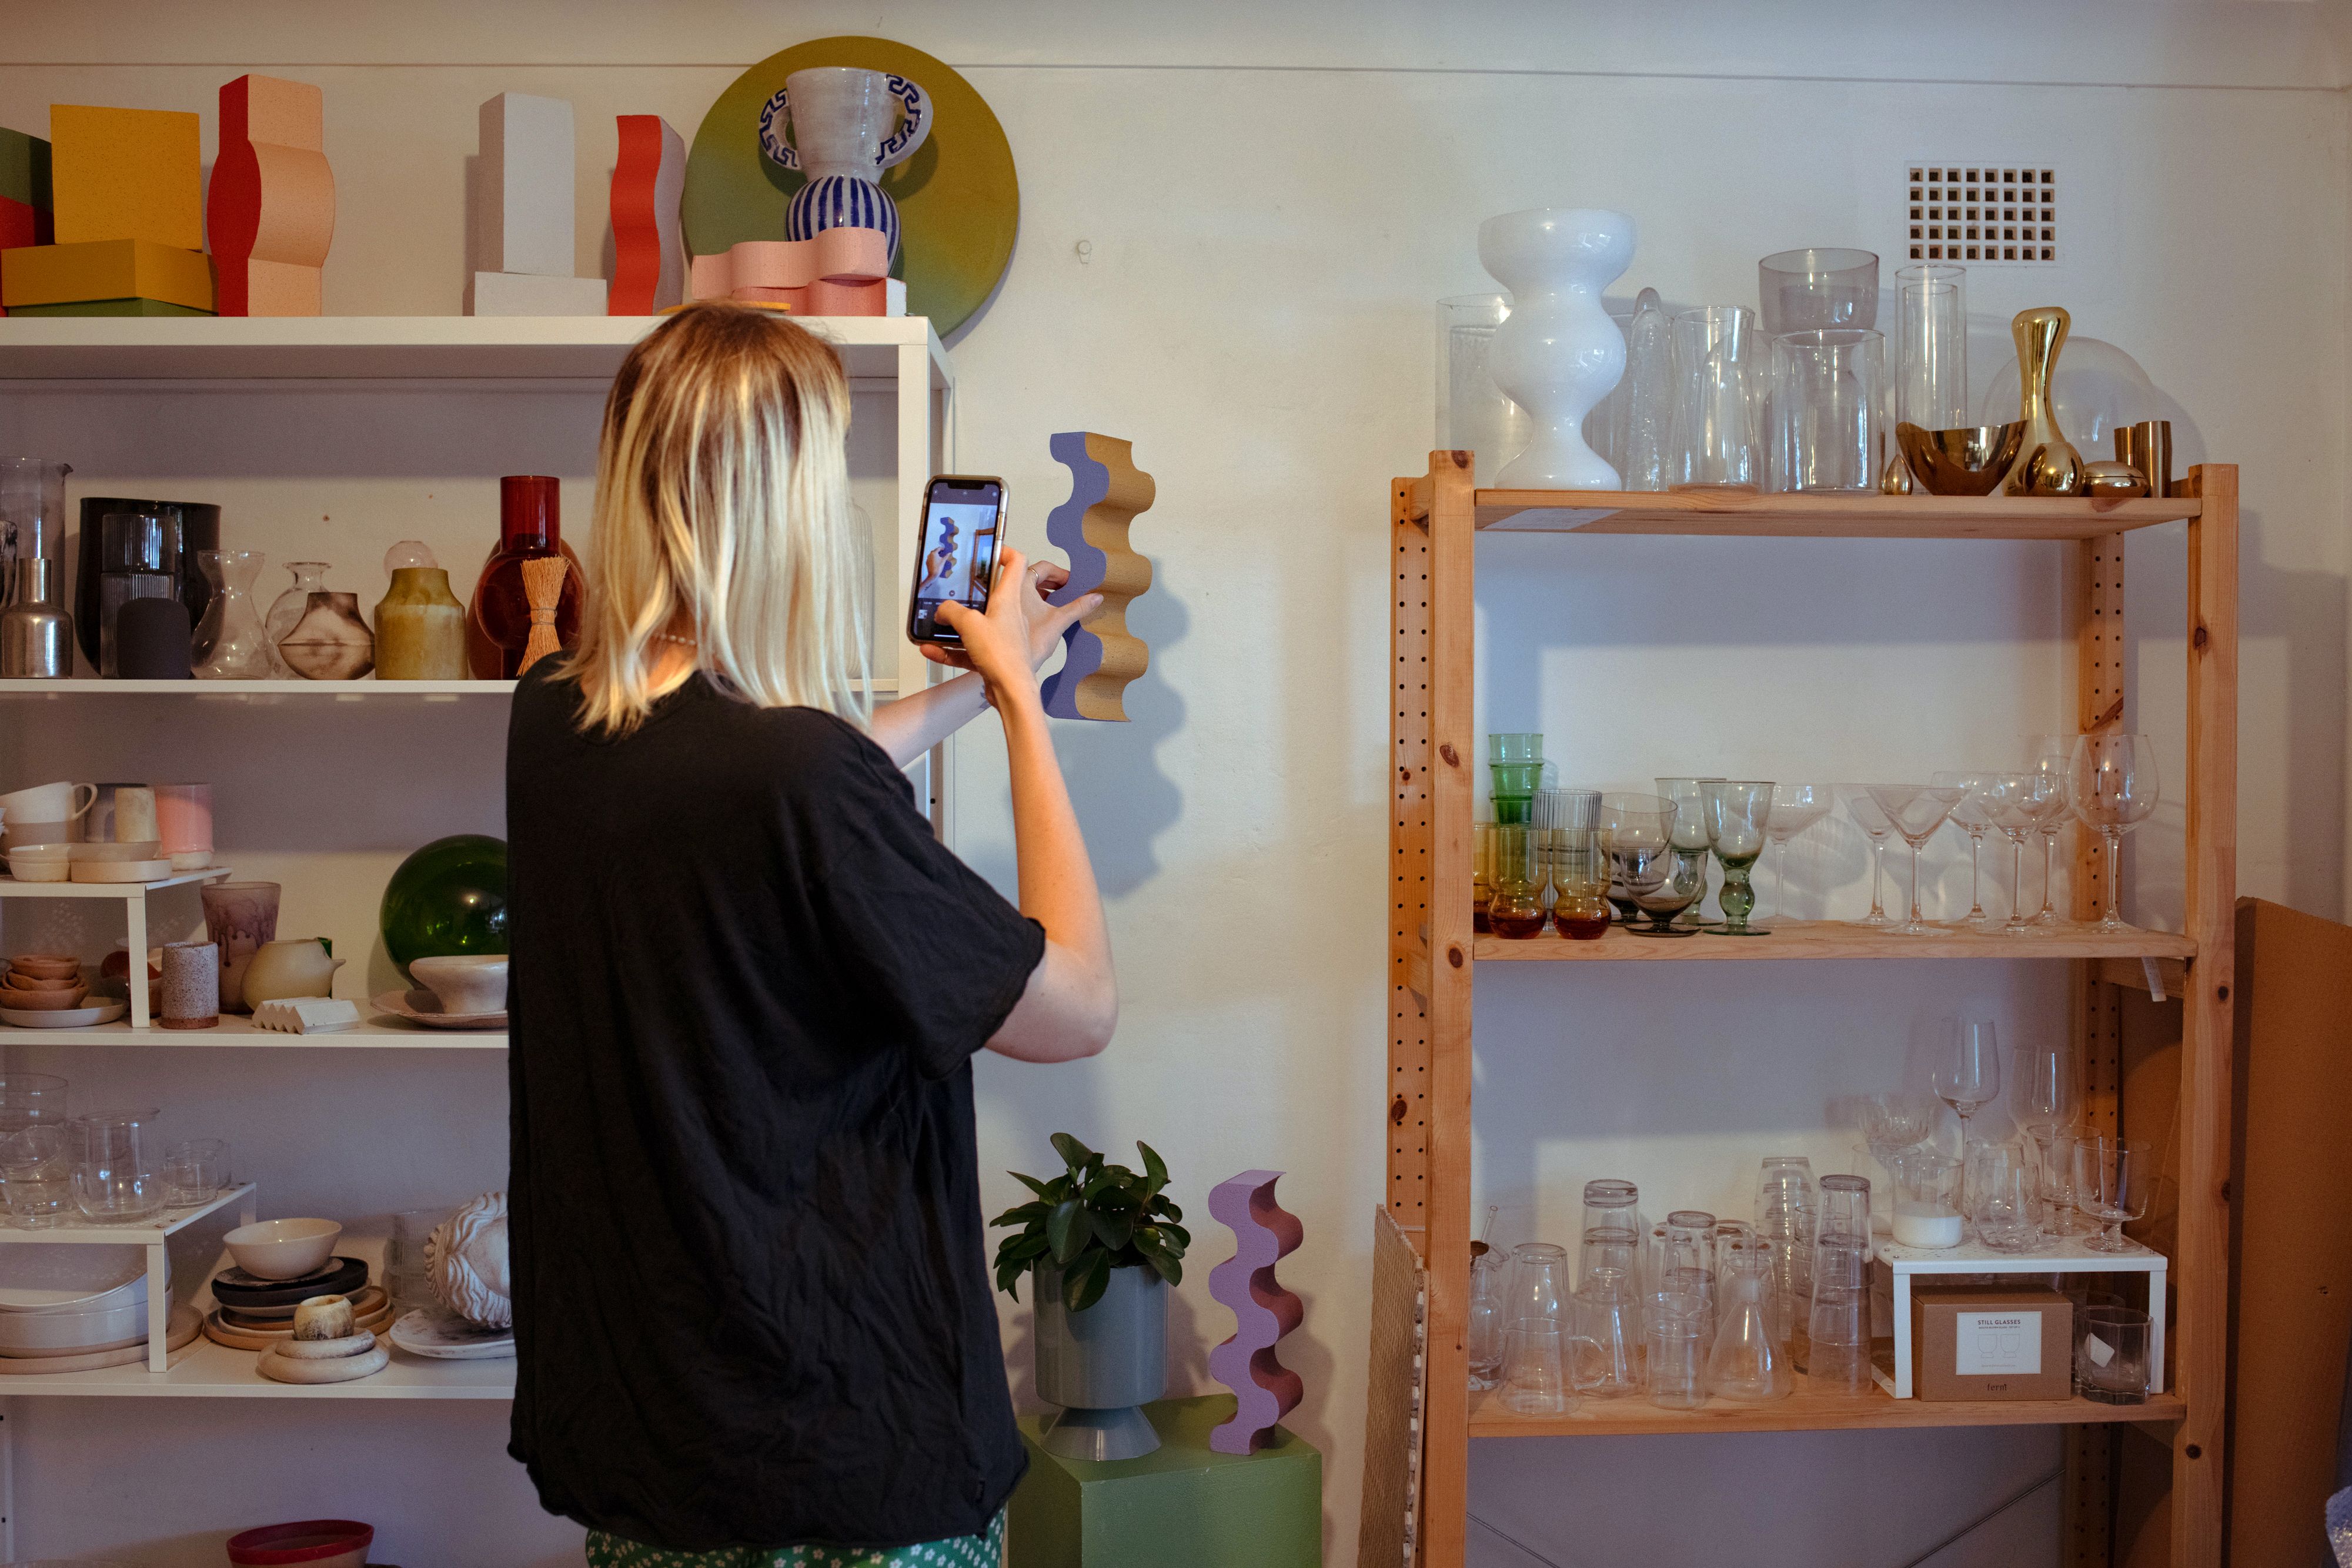 A person uses their mobile device to photograph an ornament from a shelf.